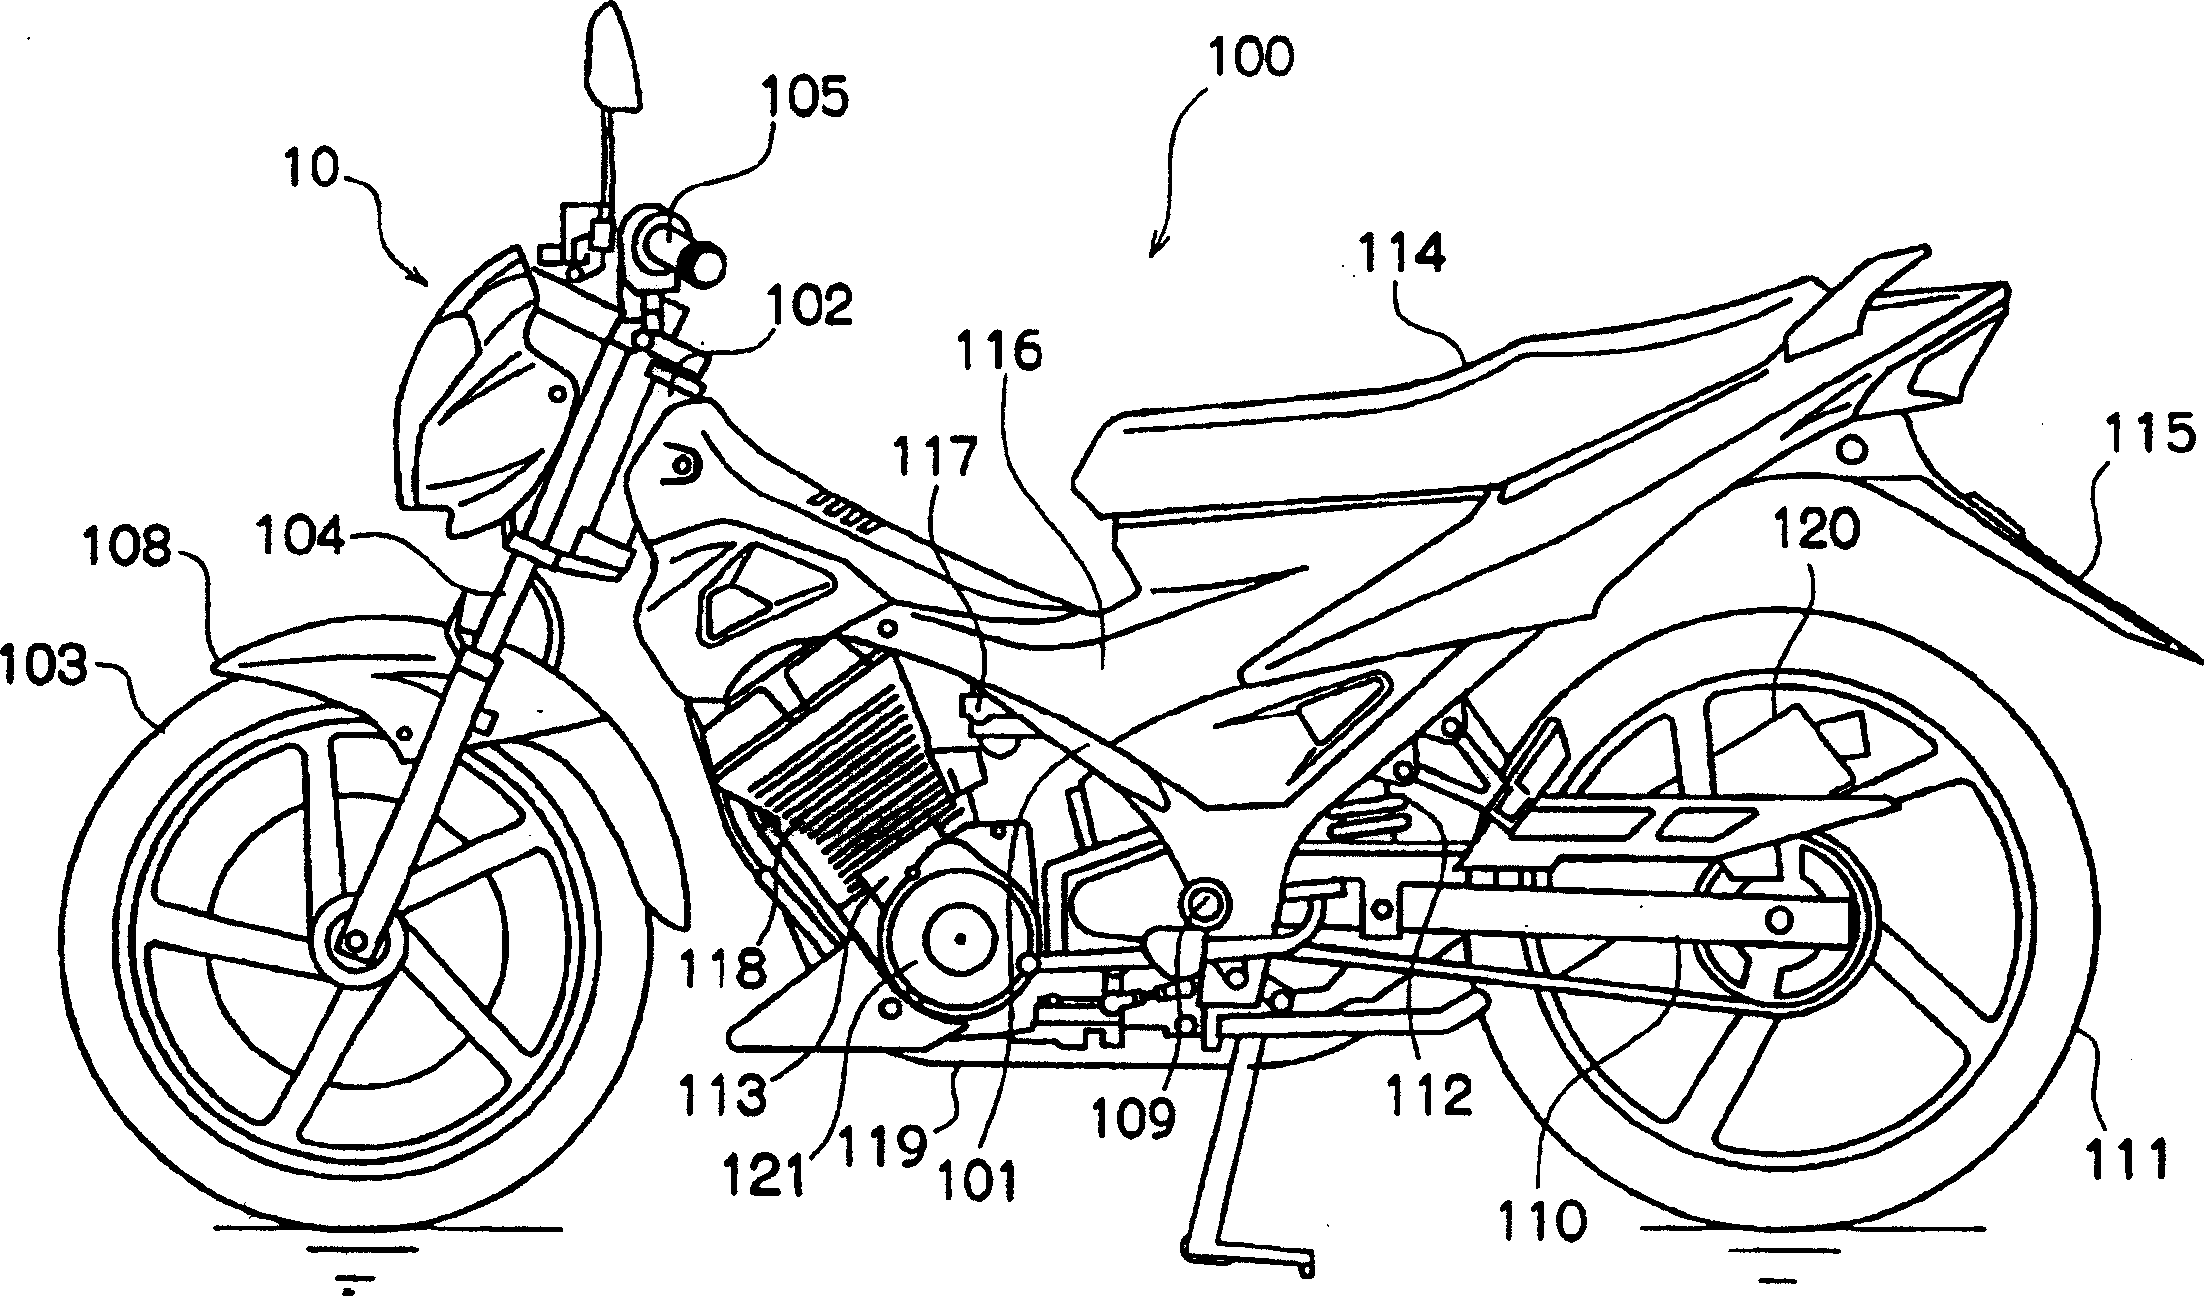 Mounting stucture of headlamp and sonsole of motor-bicycle